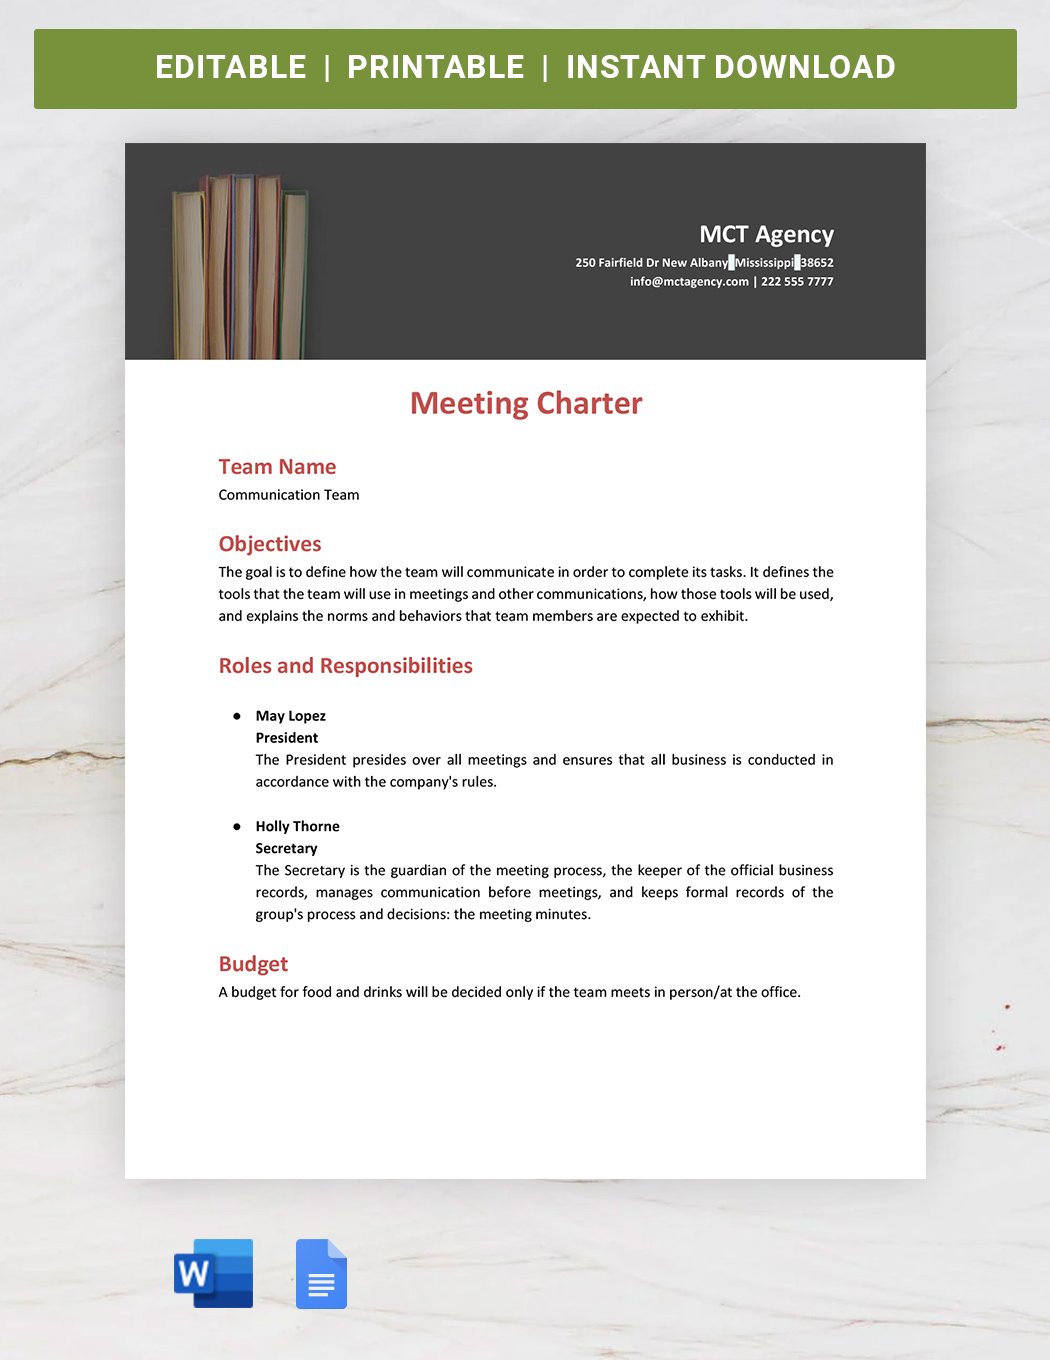 Meeting Charter Template Download in Word, Google Docs